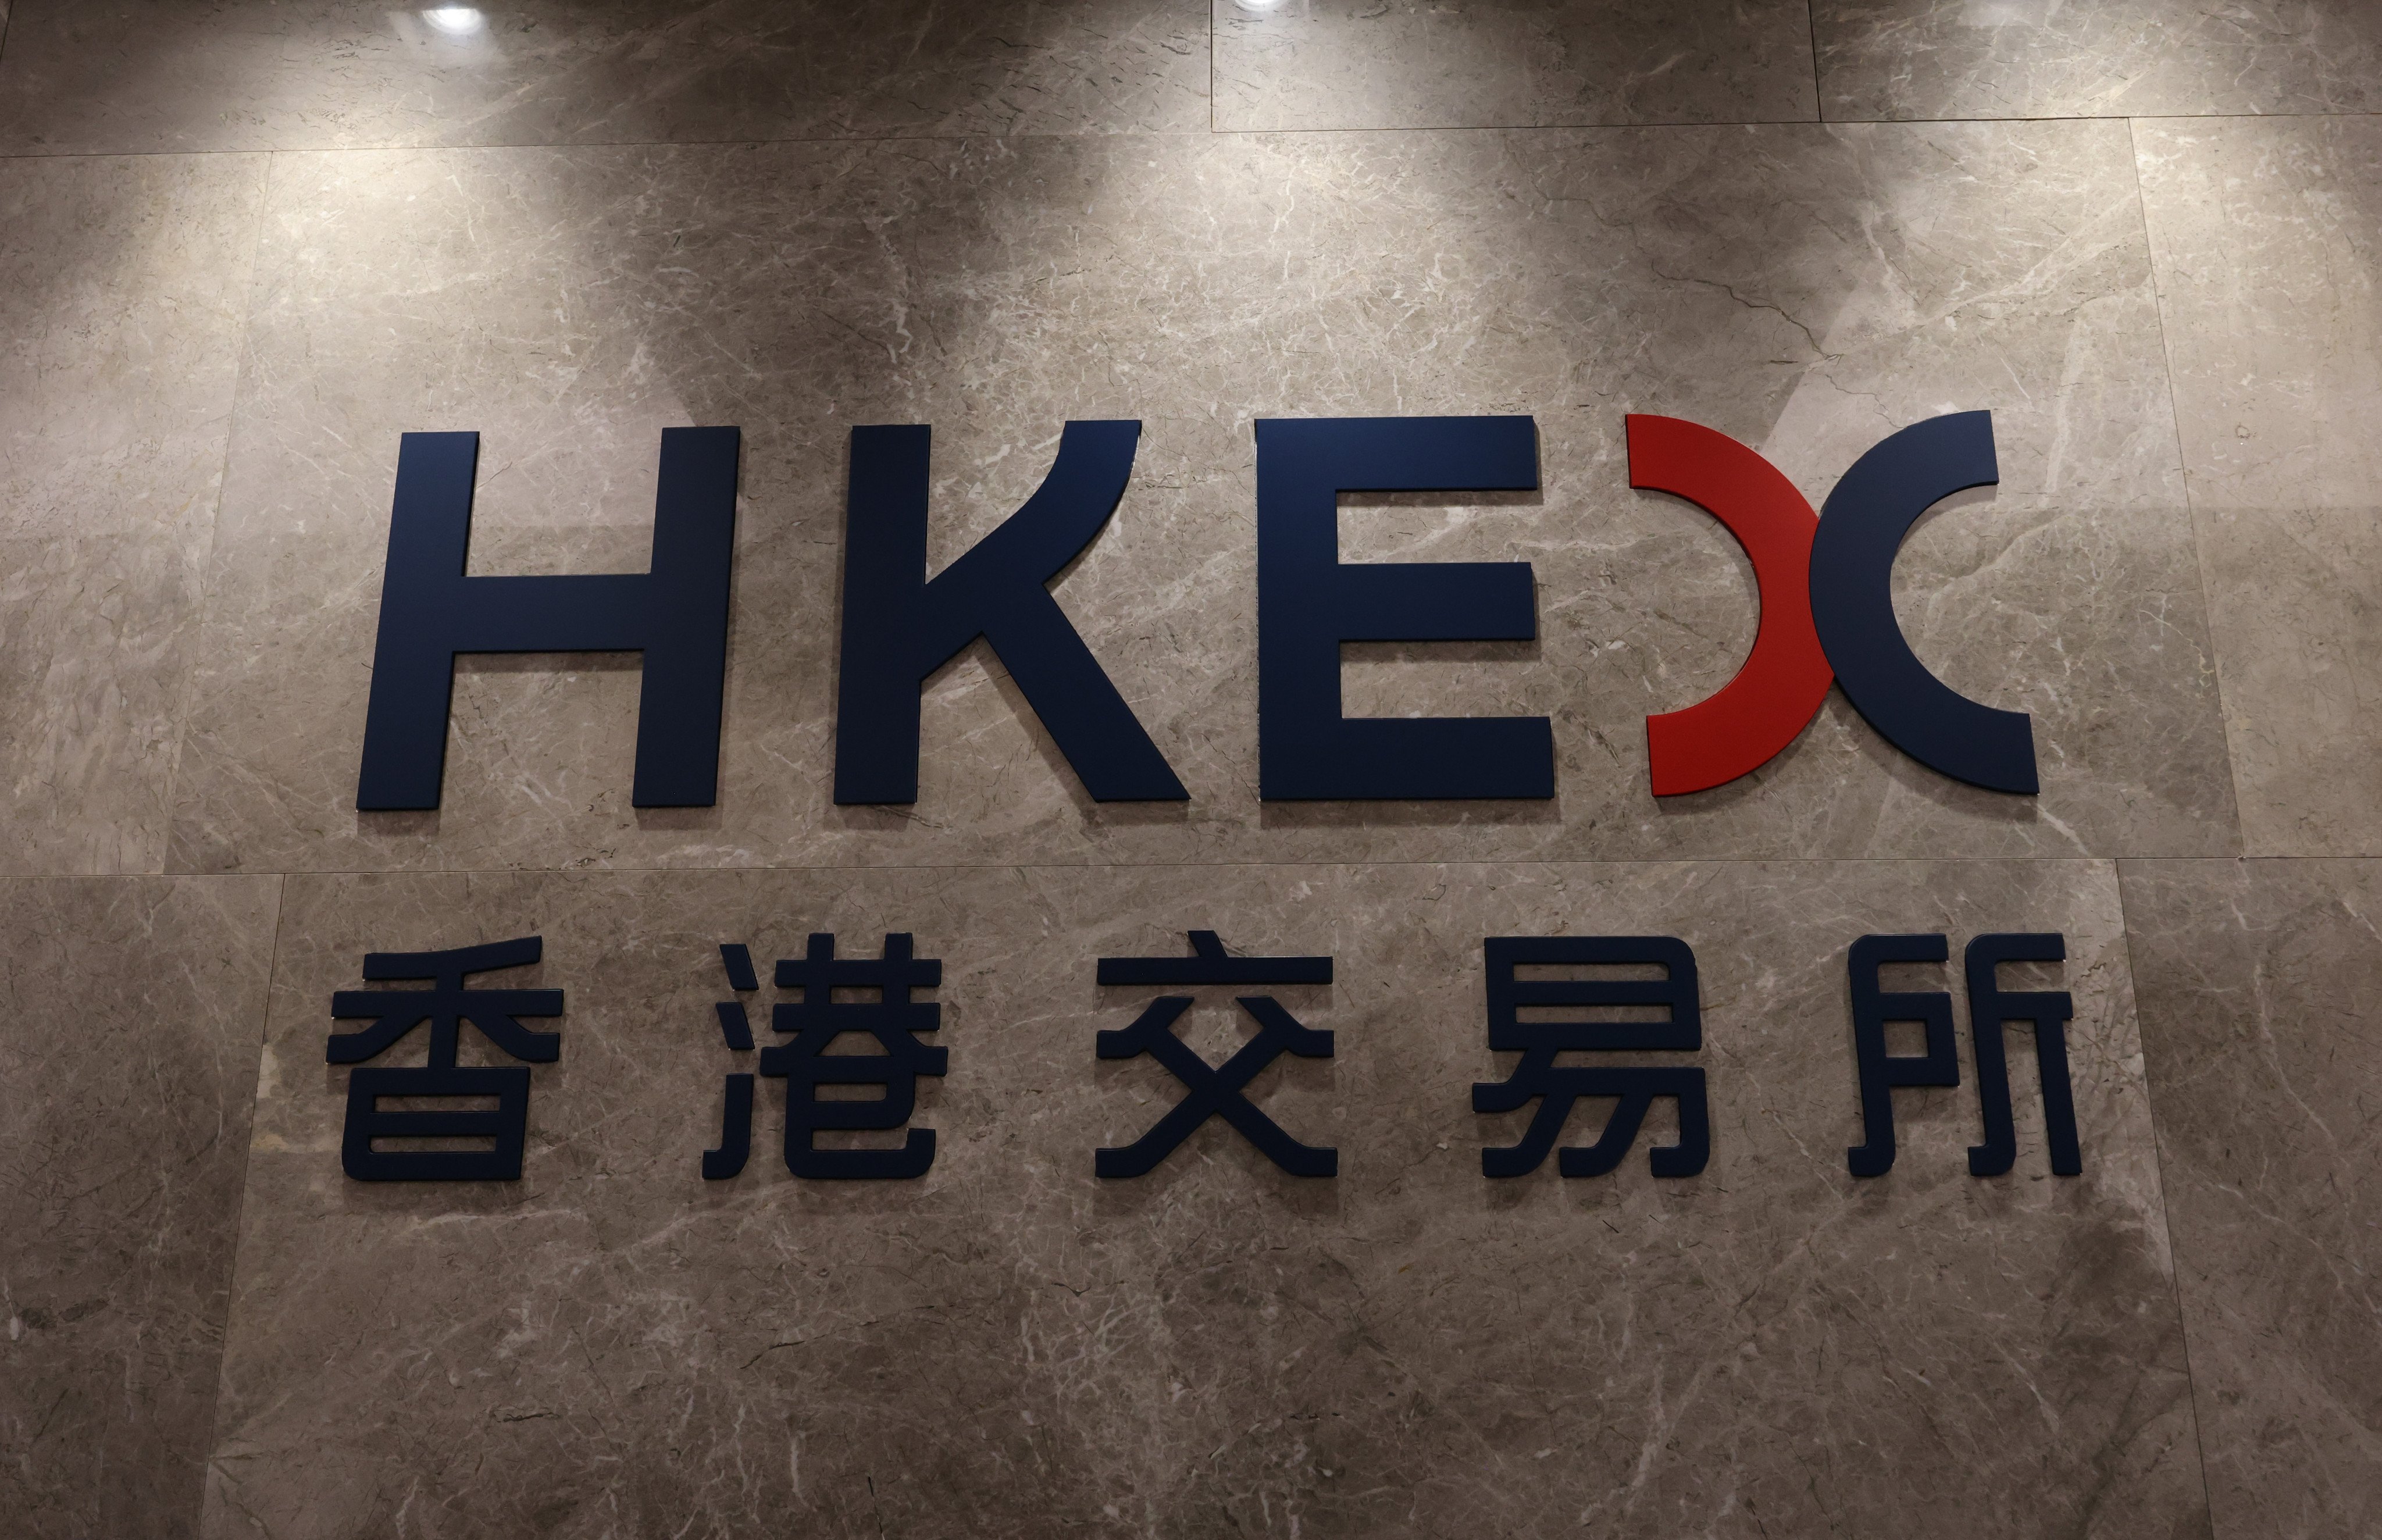 Total revenue in the first quarter declined 6 per cent to HK$5.2 billion, beating analysts’ estimates of HK$4.96 billion. Photo: Jelly Tse